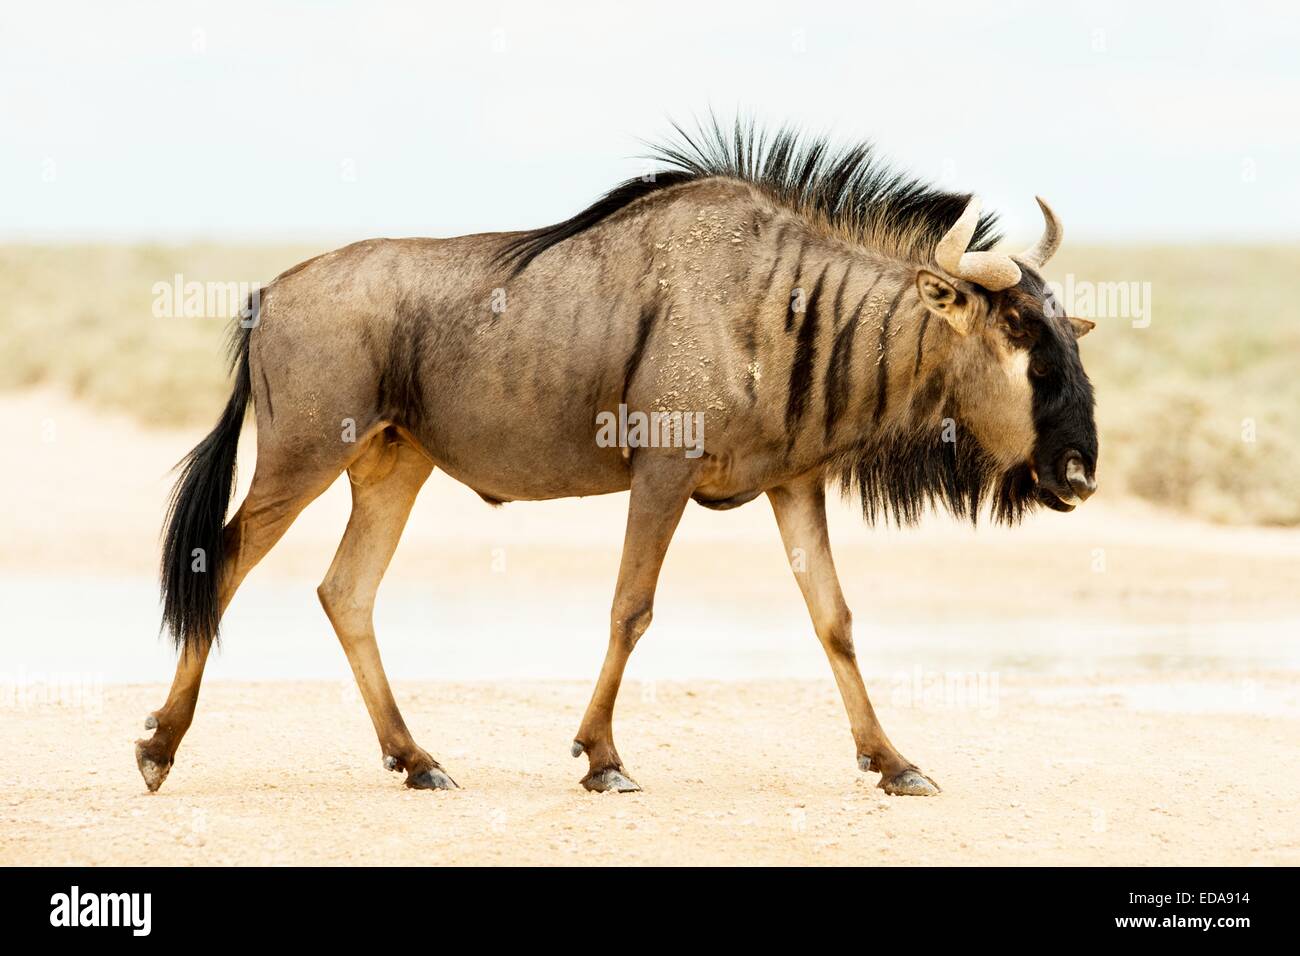 Profile of a Blue Wildebeest pictured in Etosha National Park, Namibia, Africa Stock Photo